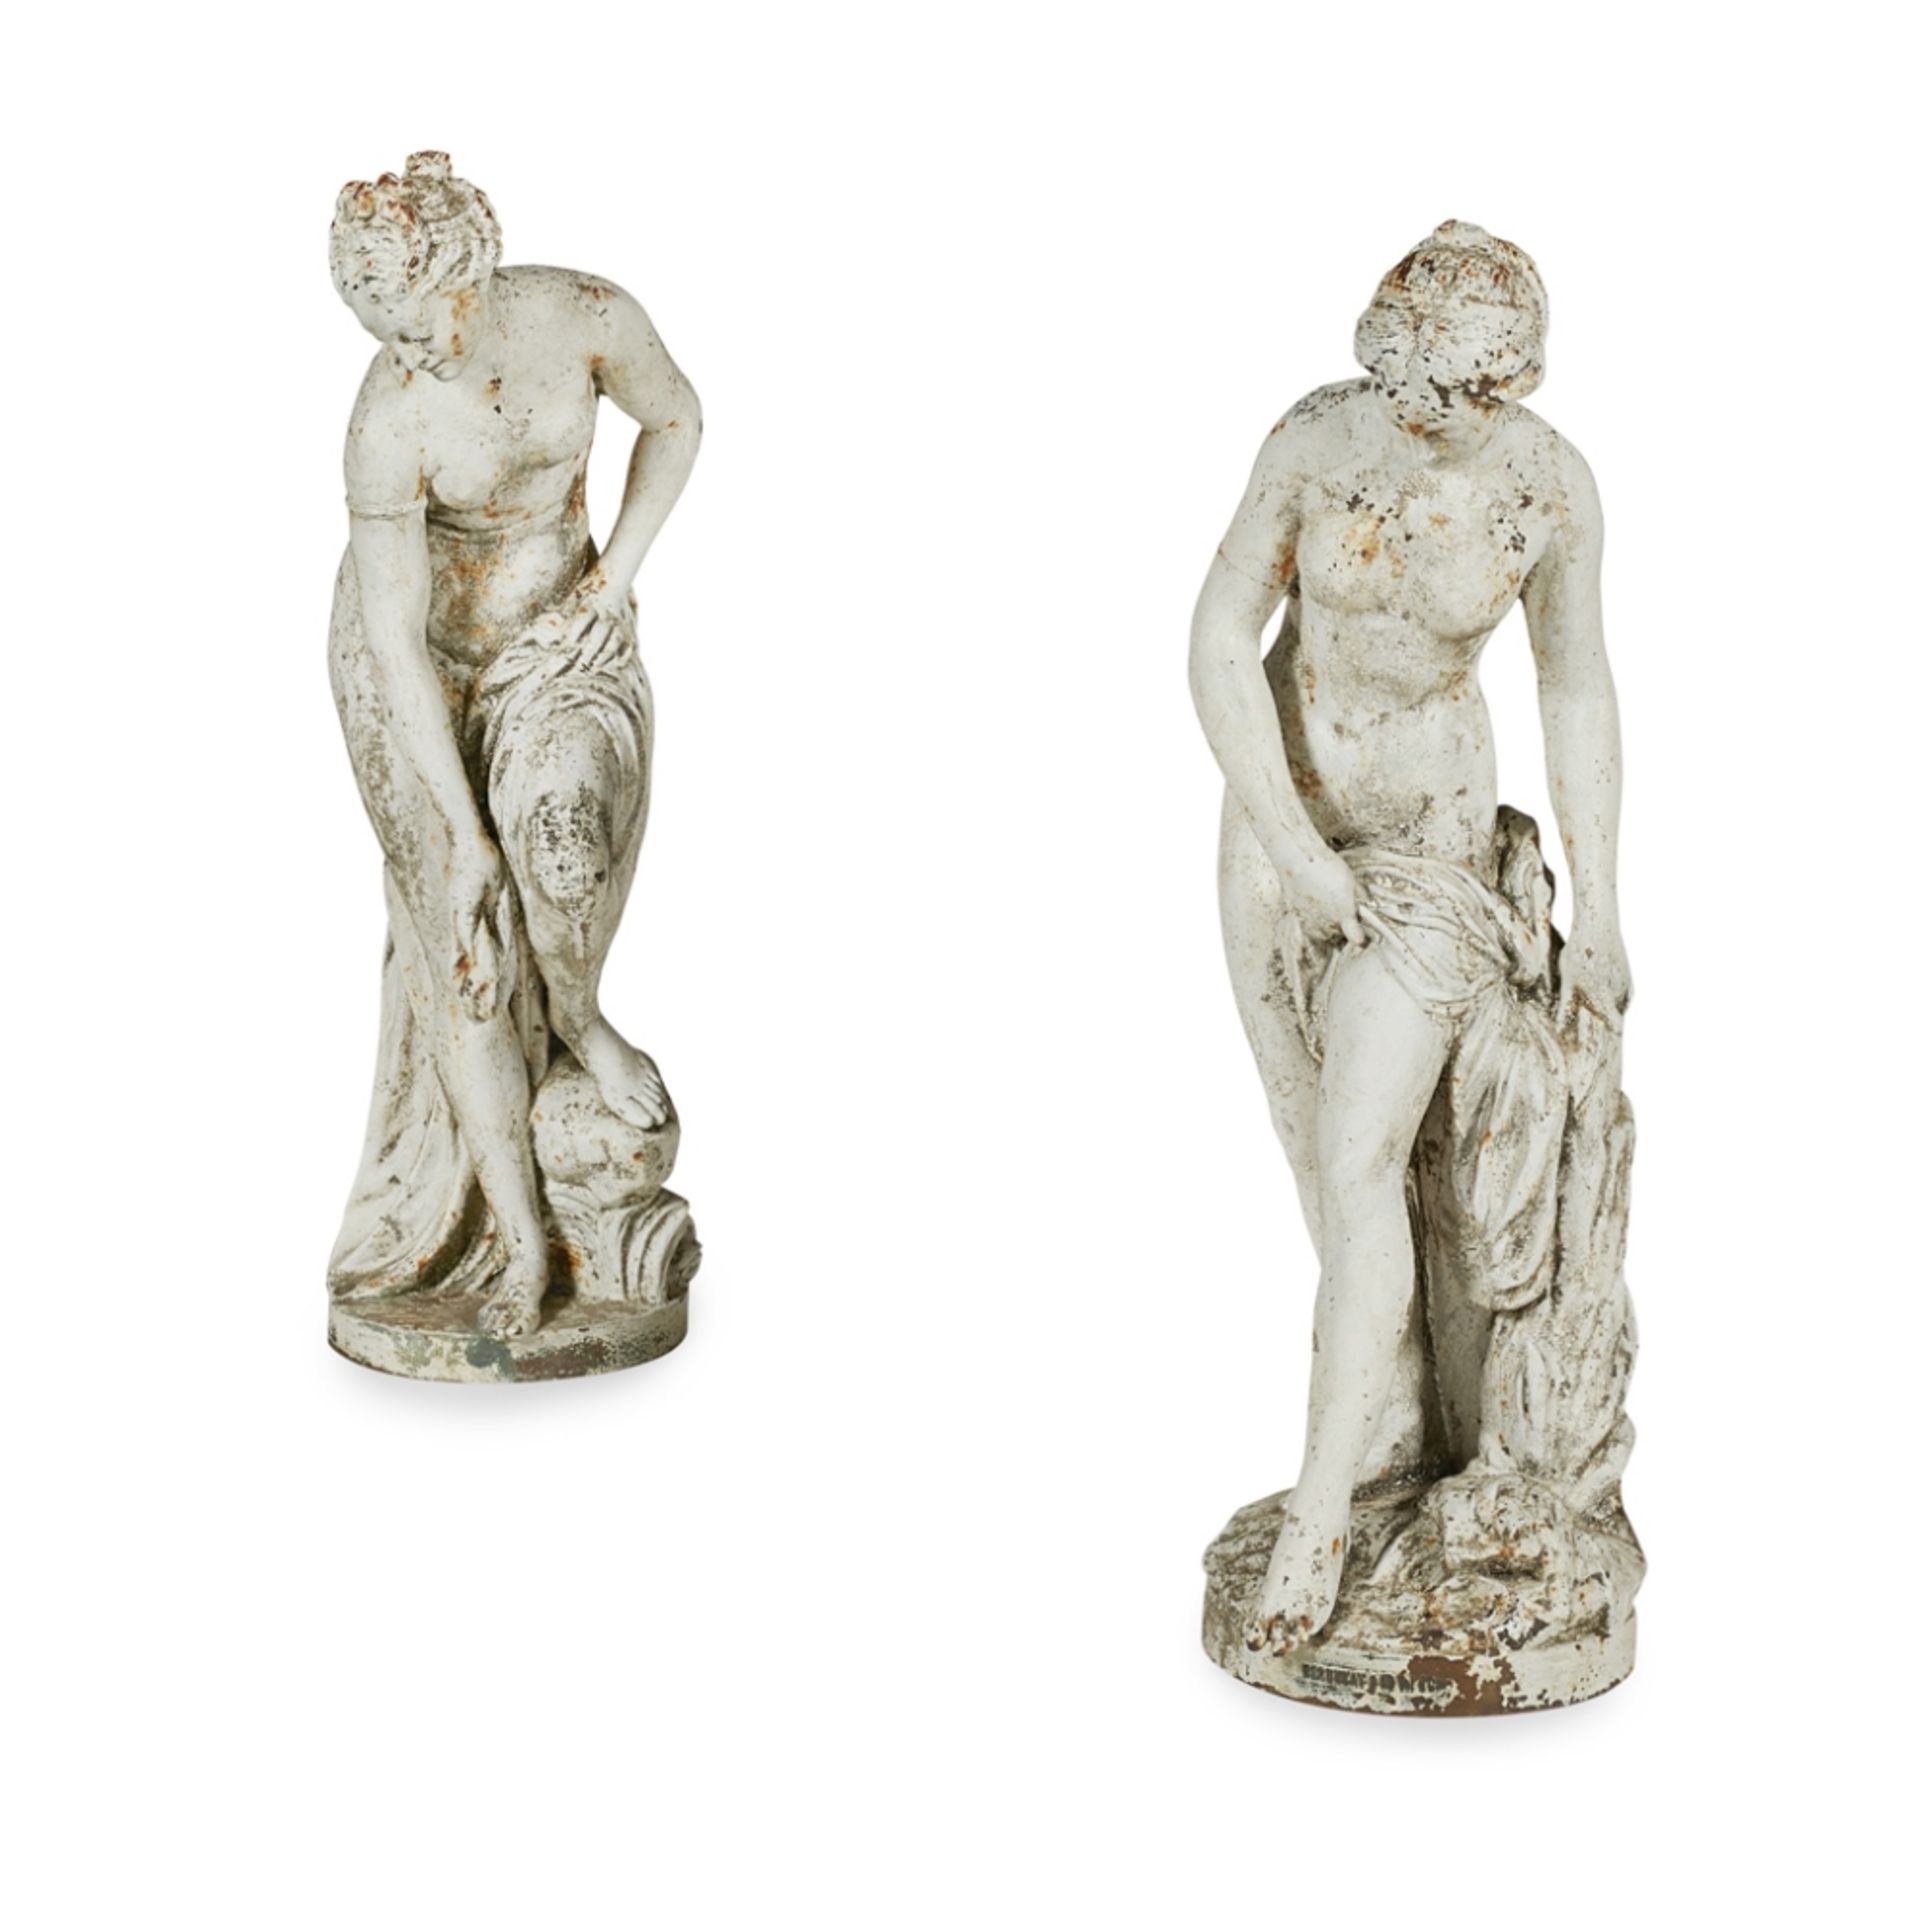 TWO FRENCH PAINTED CAST IRON FIGURES OF VENUS, BY ANDRE BARBEZAT, VAL D'OSNE19TH CENTURY the first - Image 2 of 2